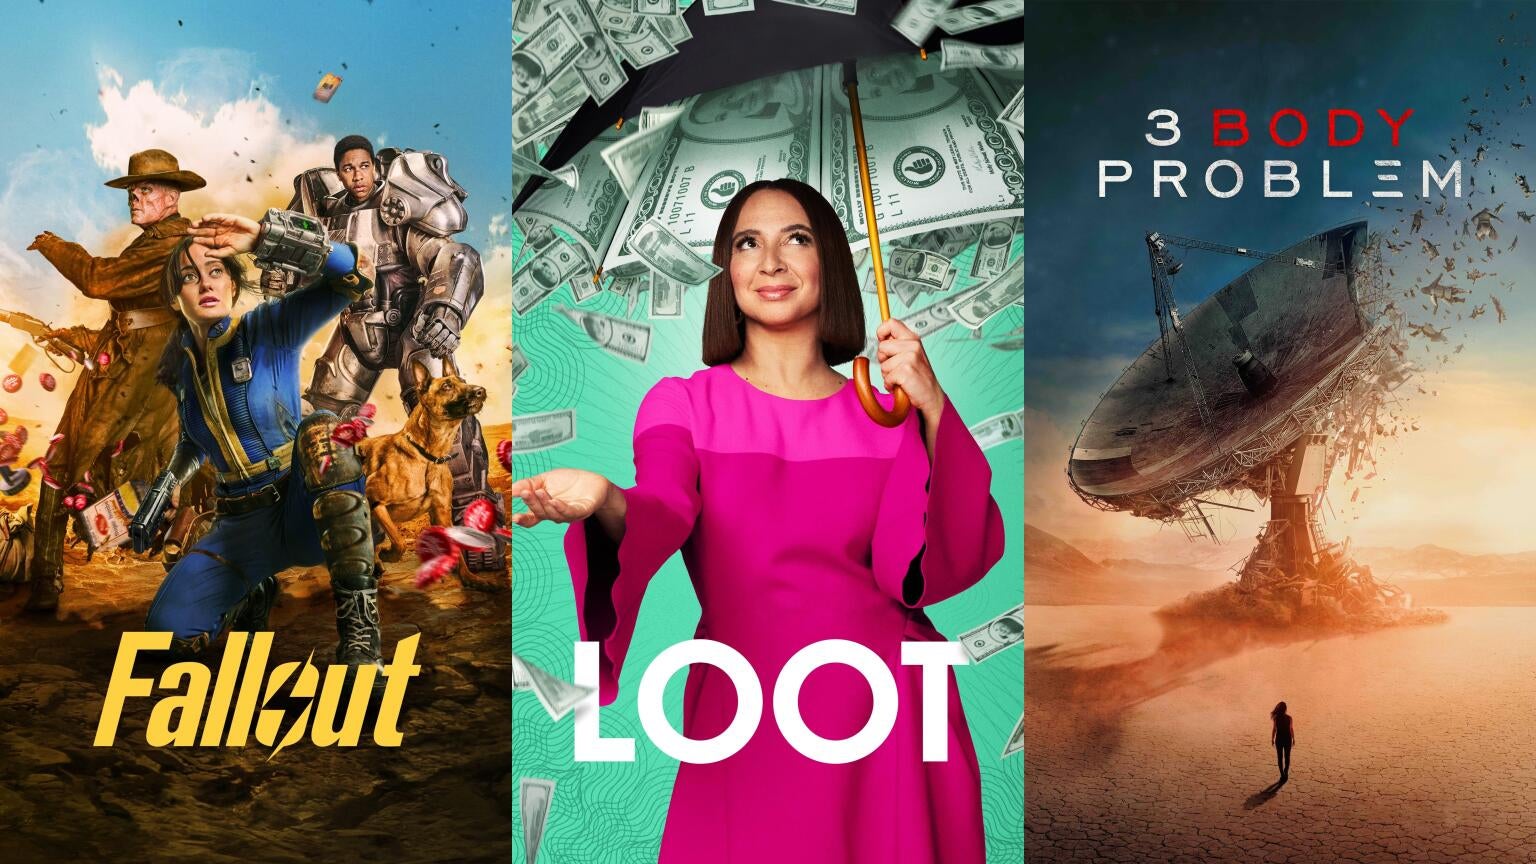 Posters for Prime Video's "Fallout," Apple TV+'s "Loot," and Netflix's "3 Body Problem"